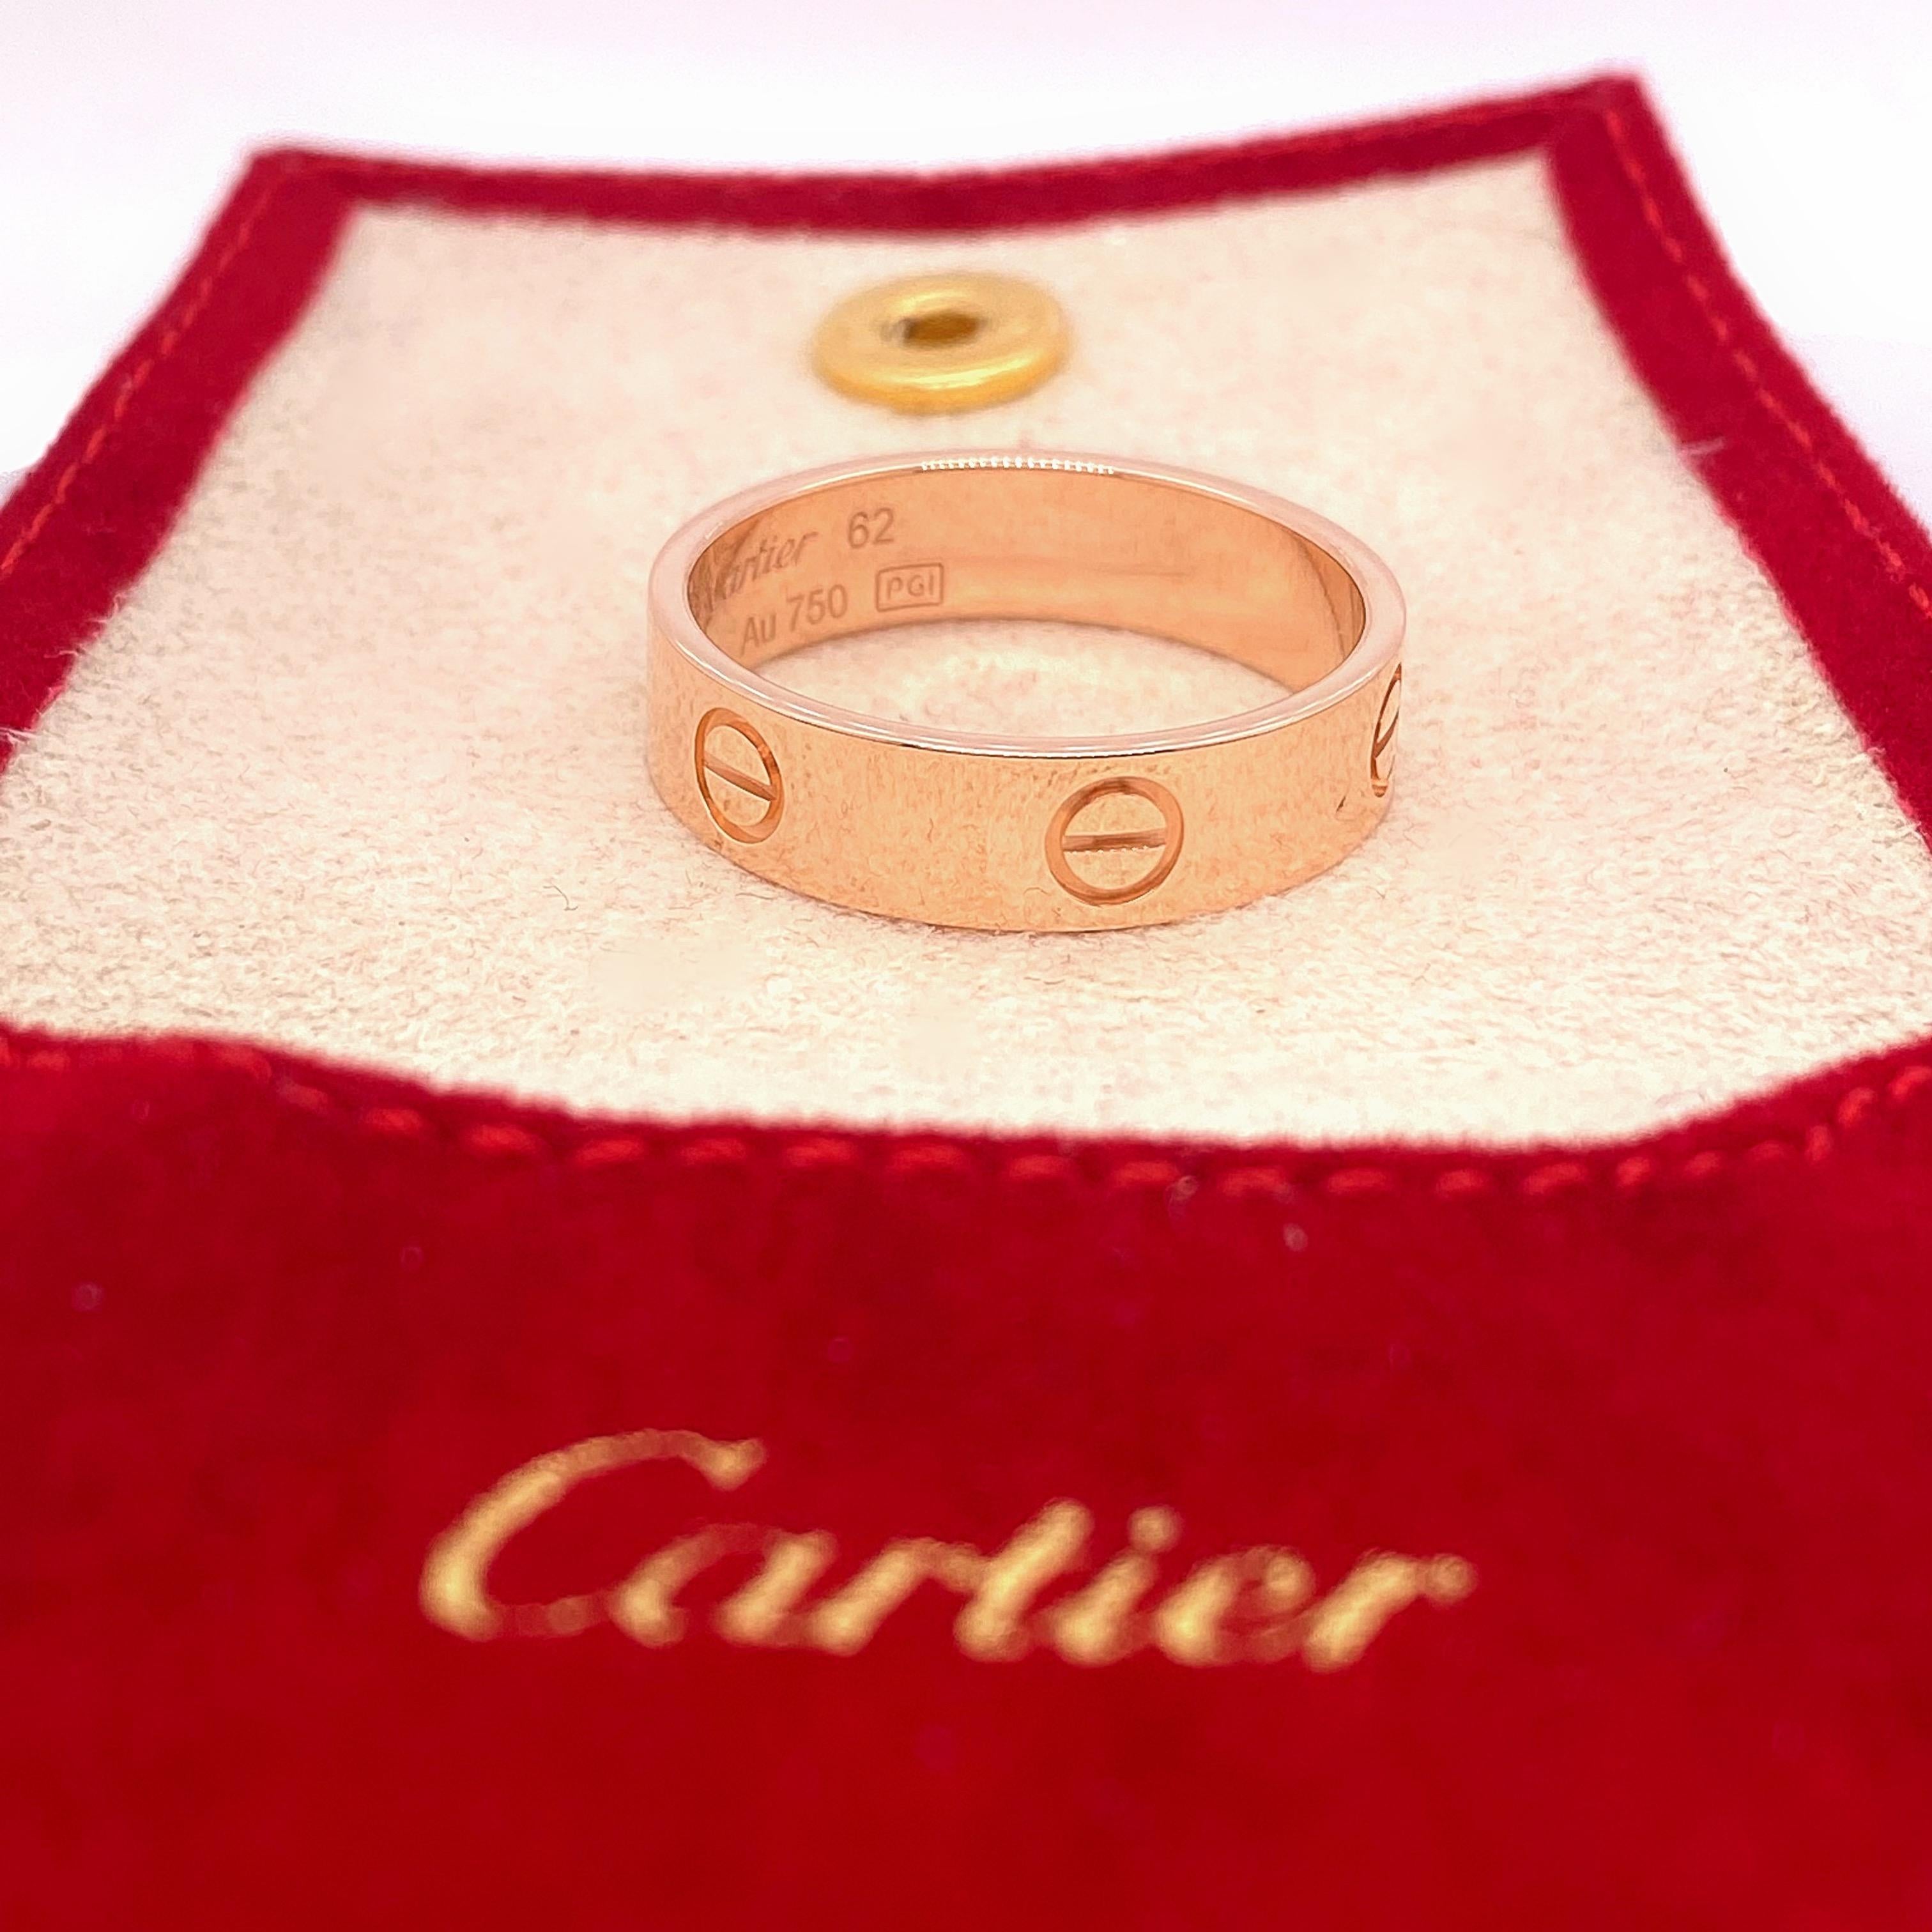 Women's or Men's Cartier LOVE Wedding Band Ring 18kt Pink Gold For Sale